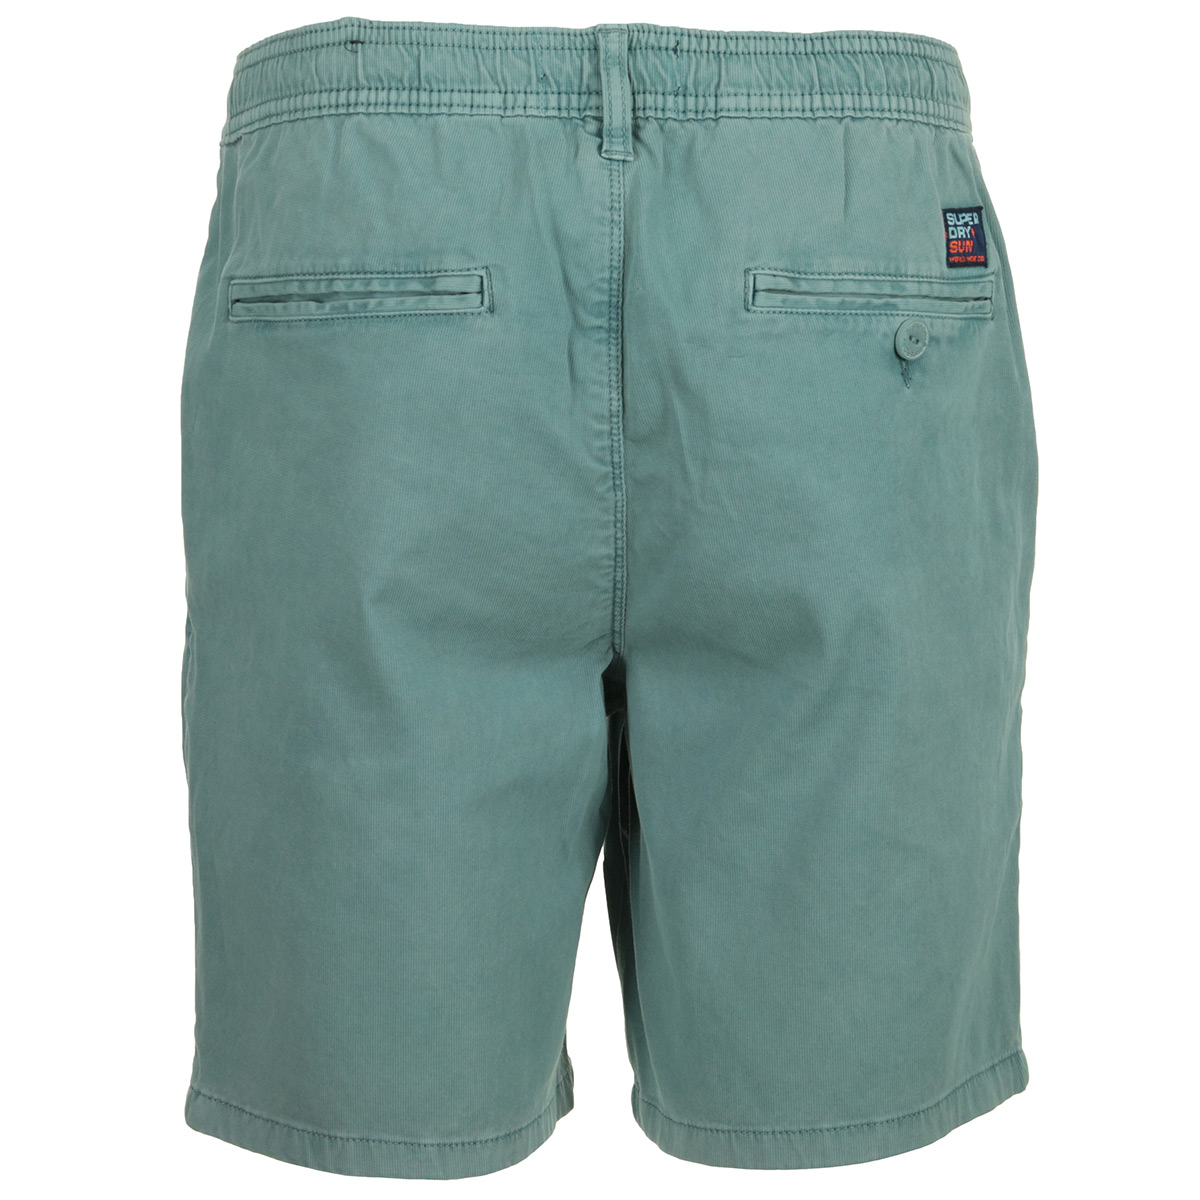 Superdry Sunscorched Chino Short